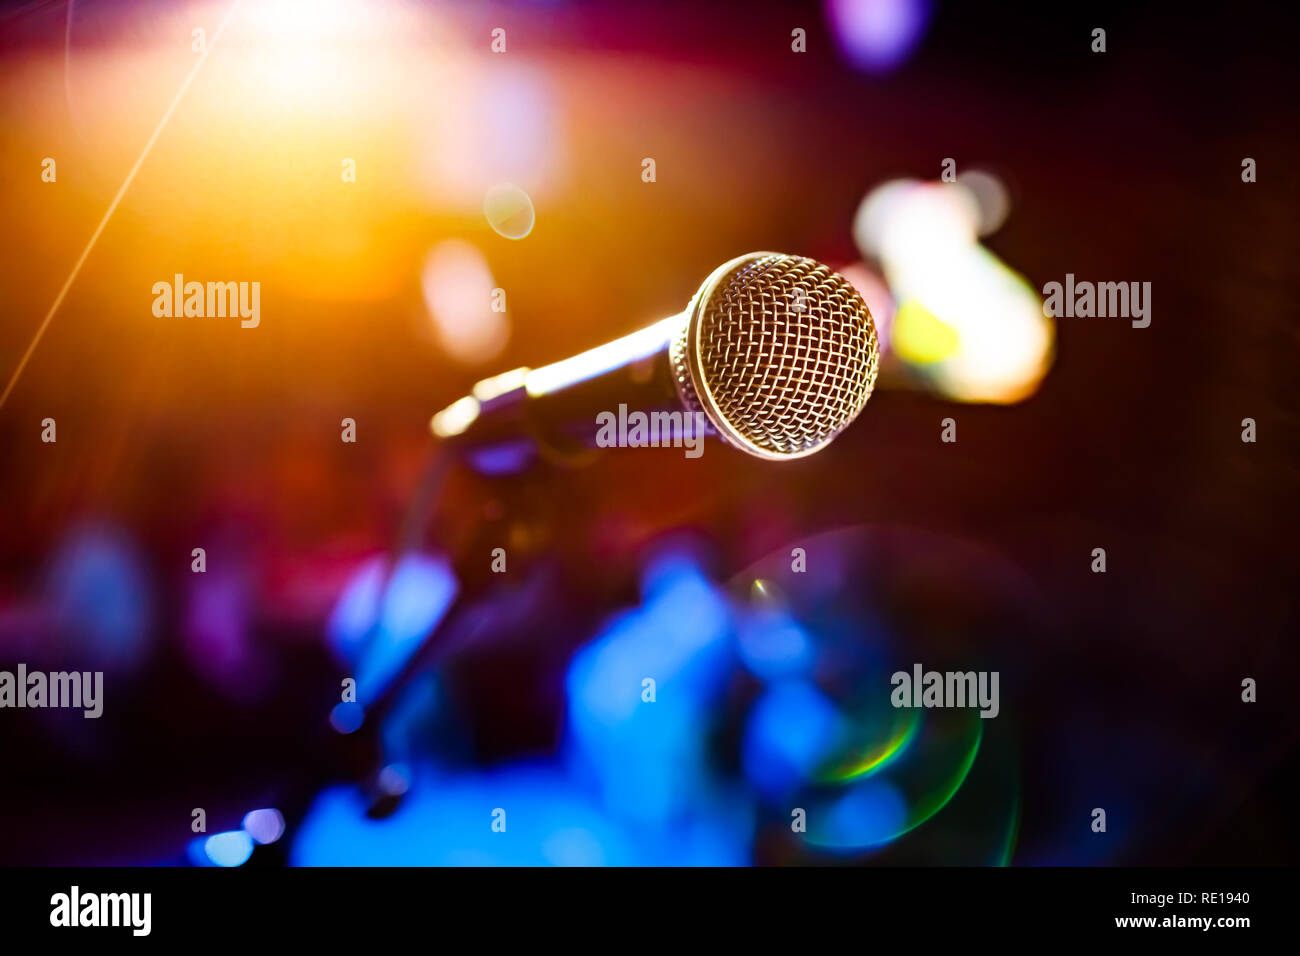 Public performance on stage Microphone on stage against a background of auditorium. Shallow depth of field. Public performance on stage. Stock Photo